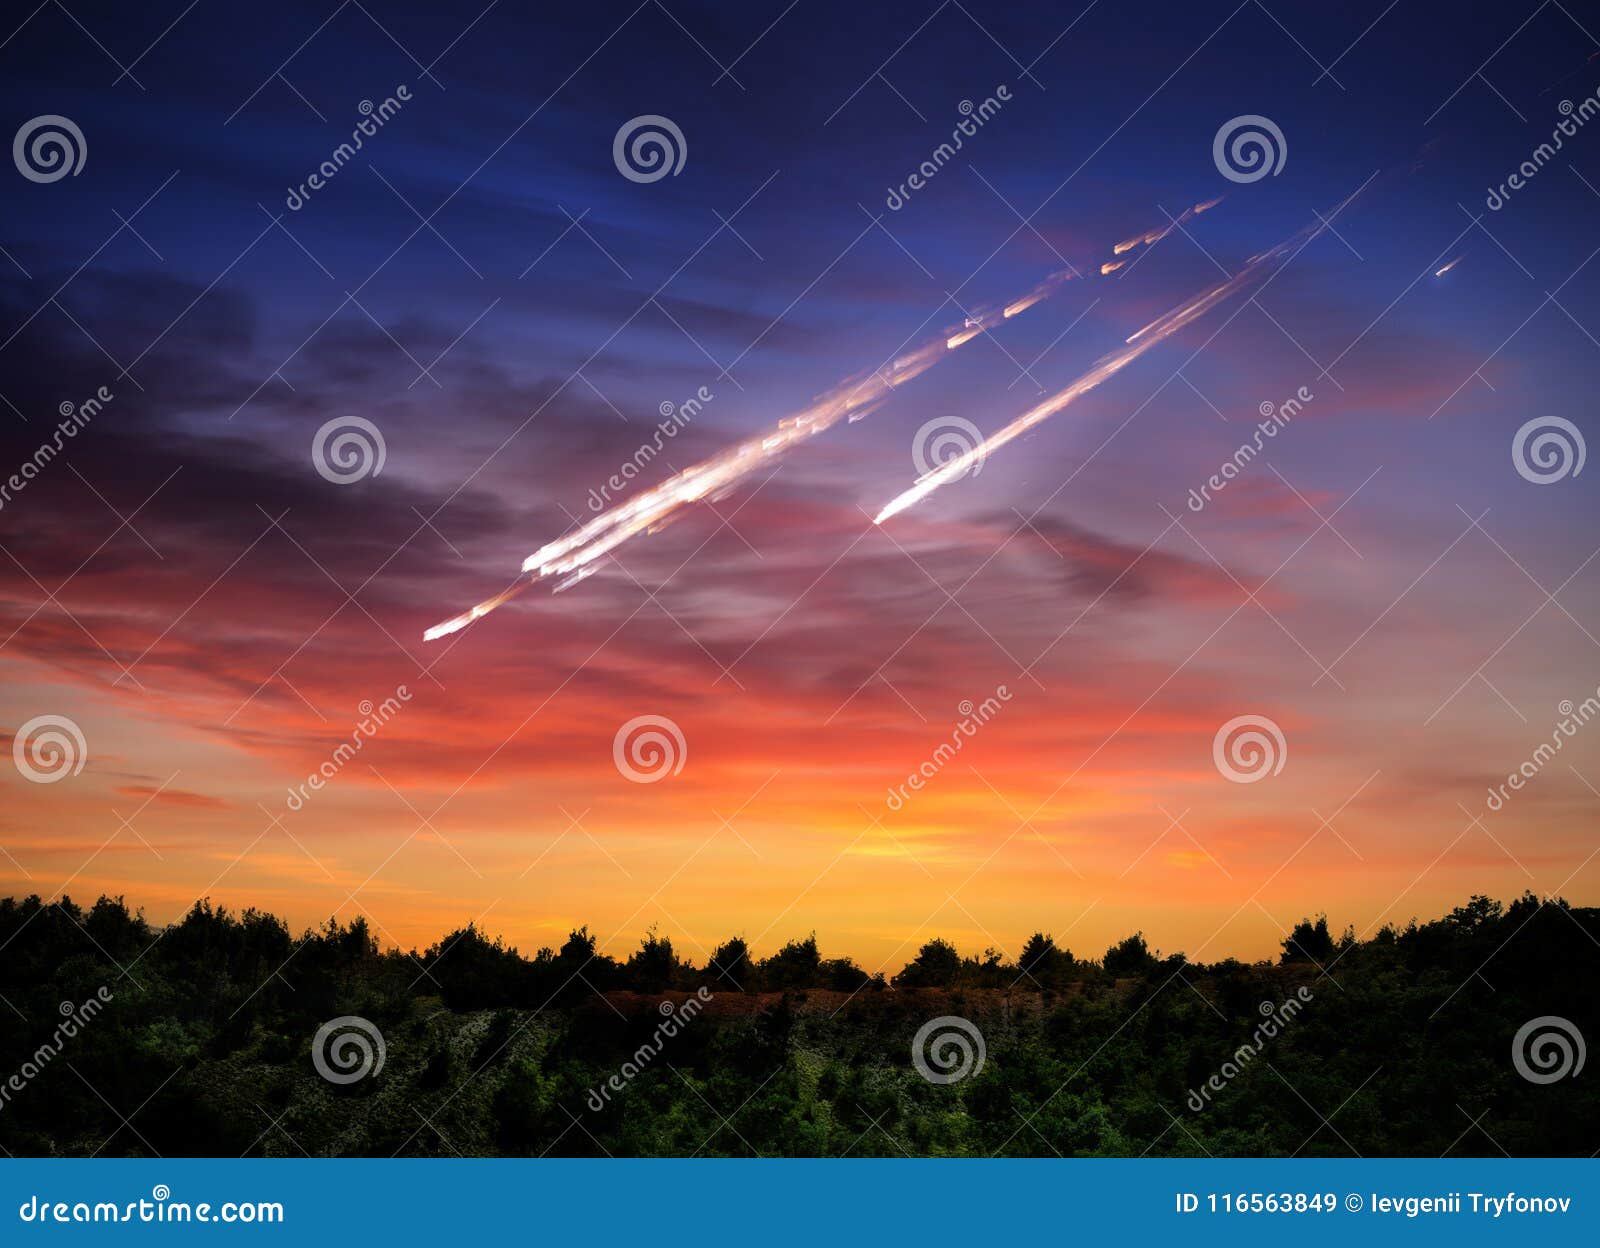 falling meteorite, asteroid, comet on earth. s of this image furnished by nasa.